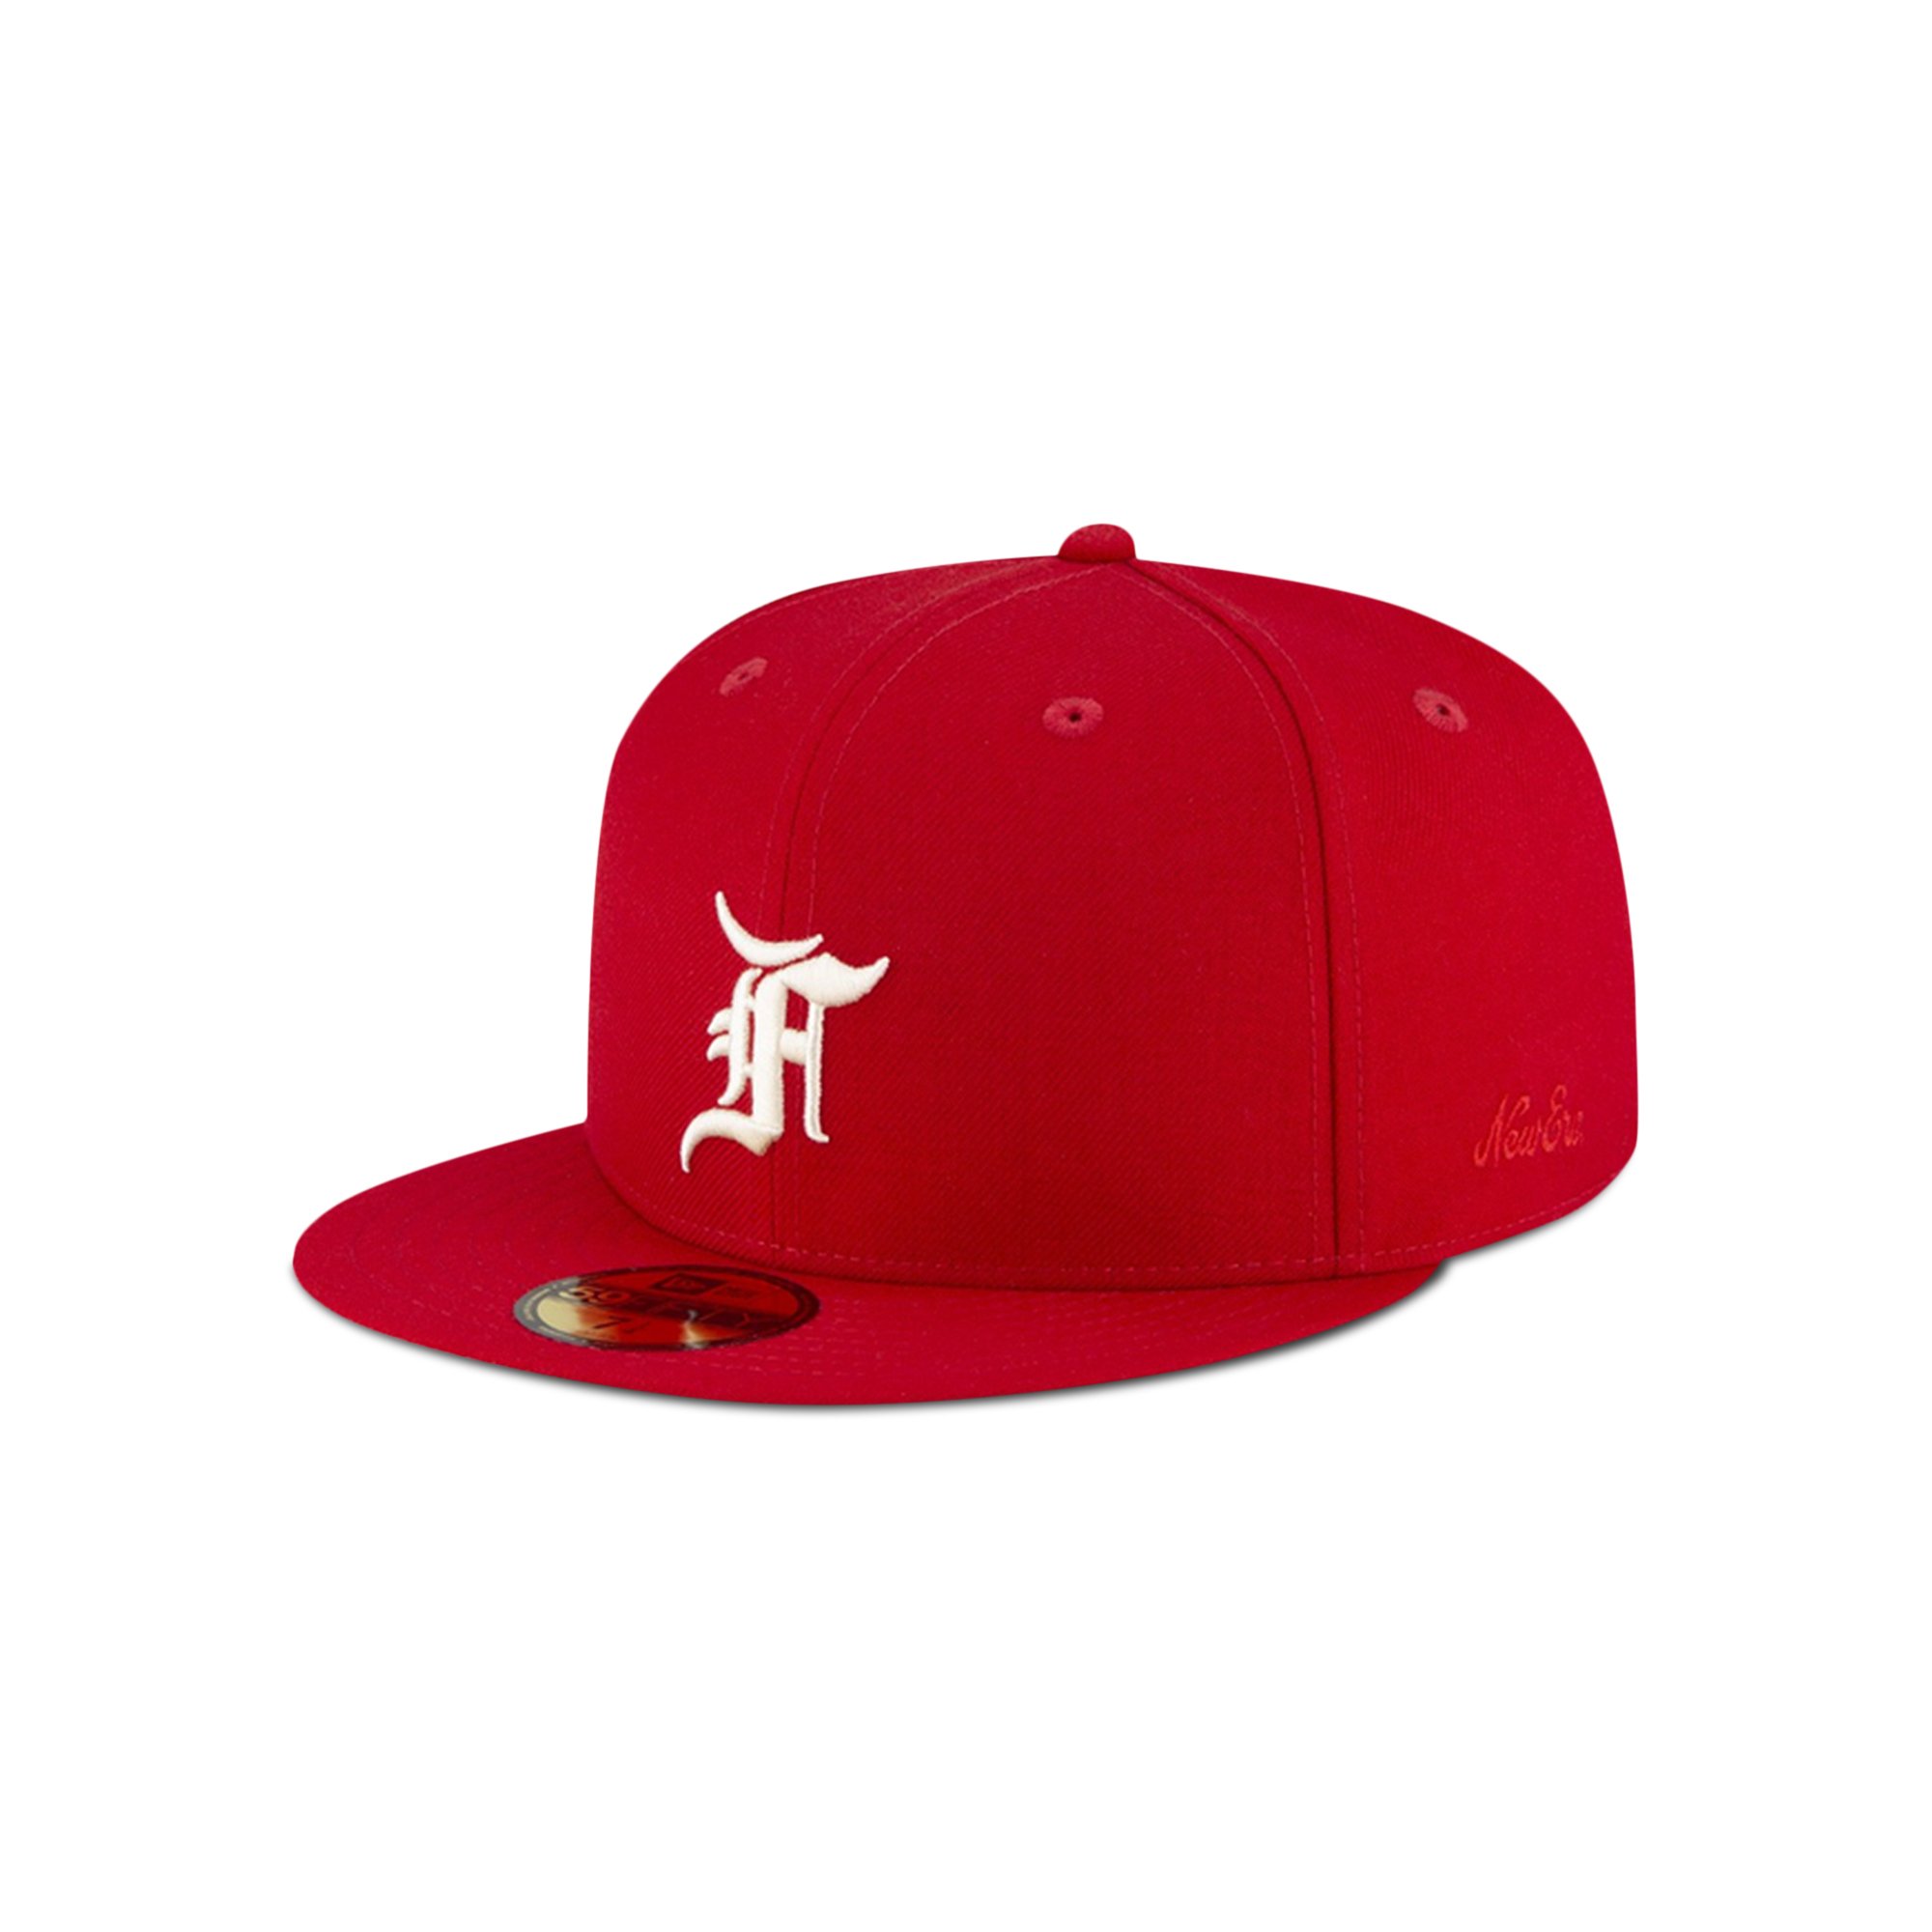 Fear of God Essentials x New Era Fitted Cap 'Red/White'